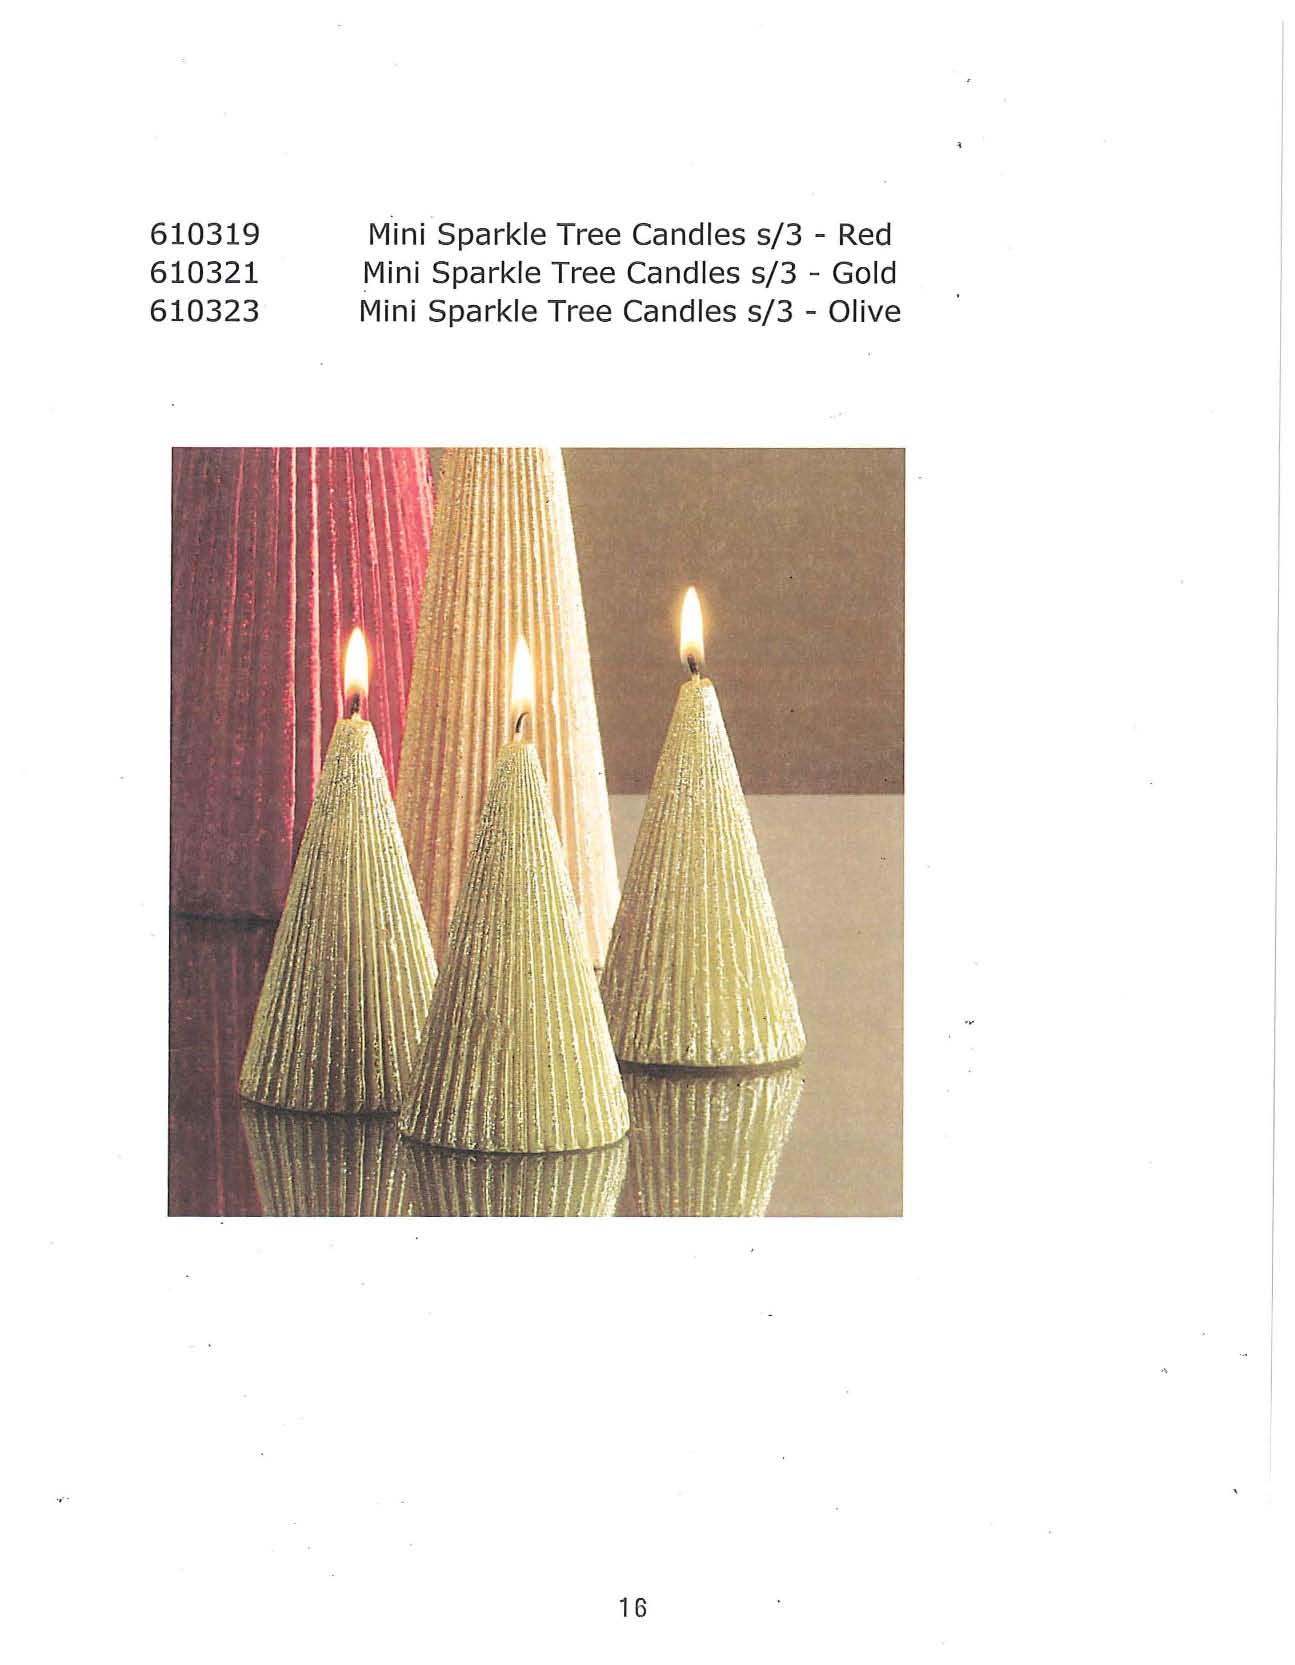 Mini Sparkle Tree Candle s/3 - Red, Gold and Olive